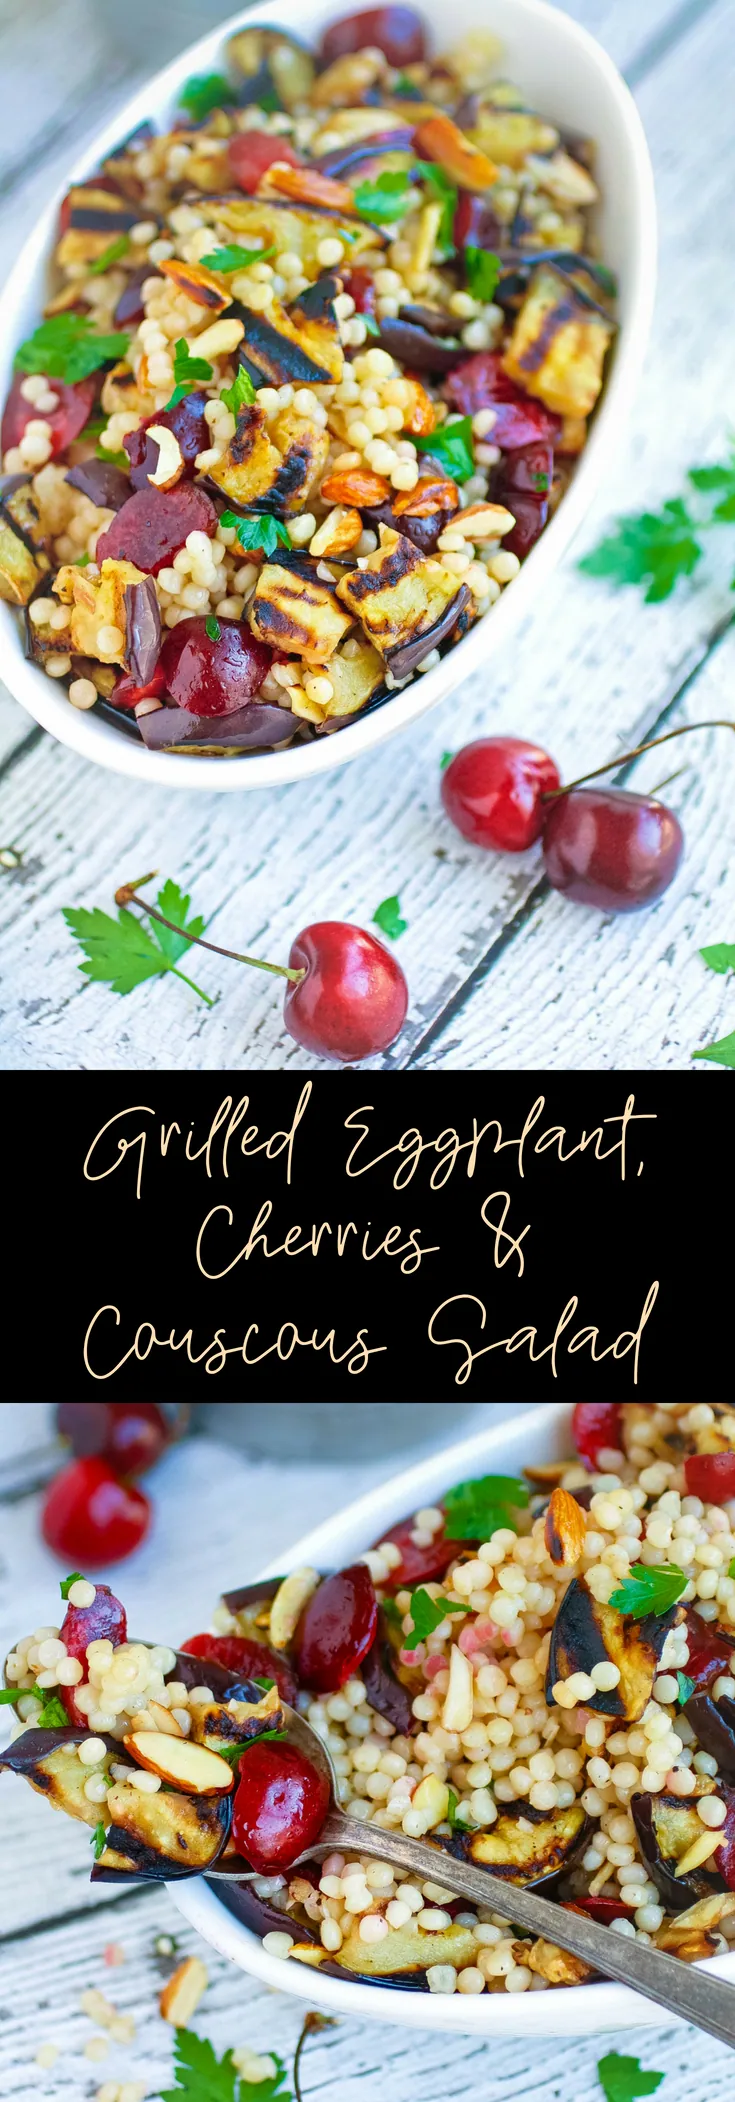 Grilled Eggplant, Cherries, and Couscous Salad is a lovely side dish for the summer season. Grilled Eggplant, Cherries, and Couscous Salad makes a tasty dish for the season. 